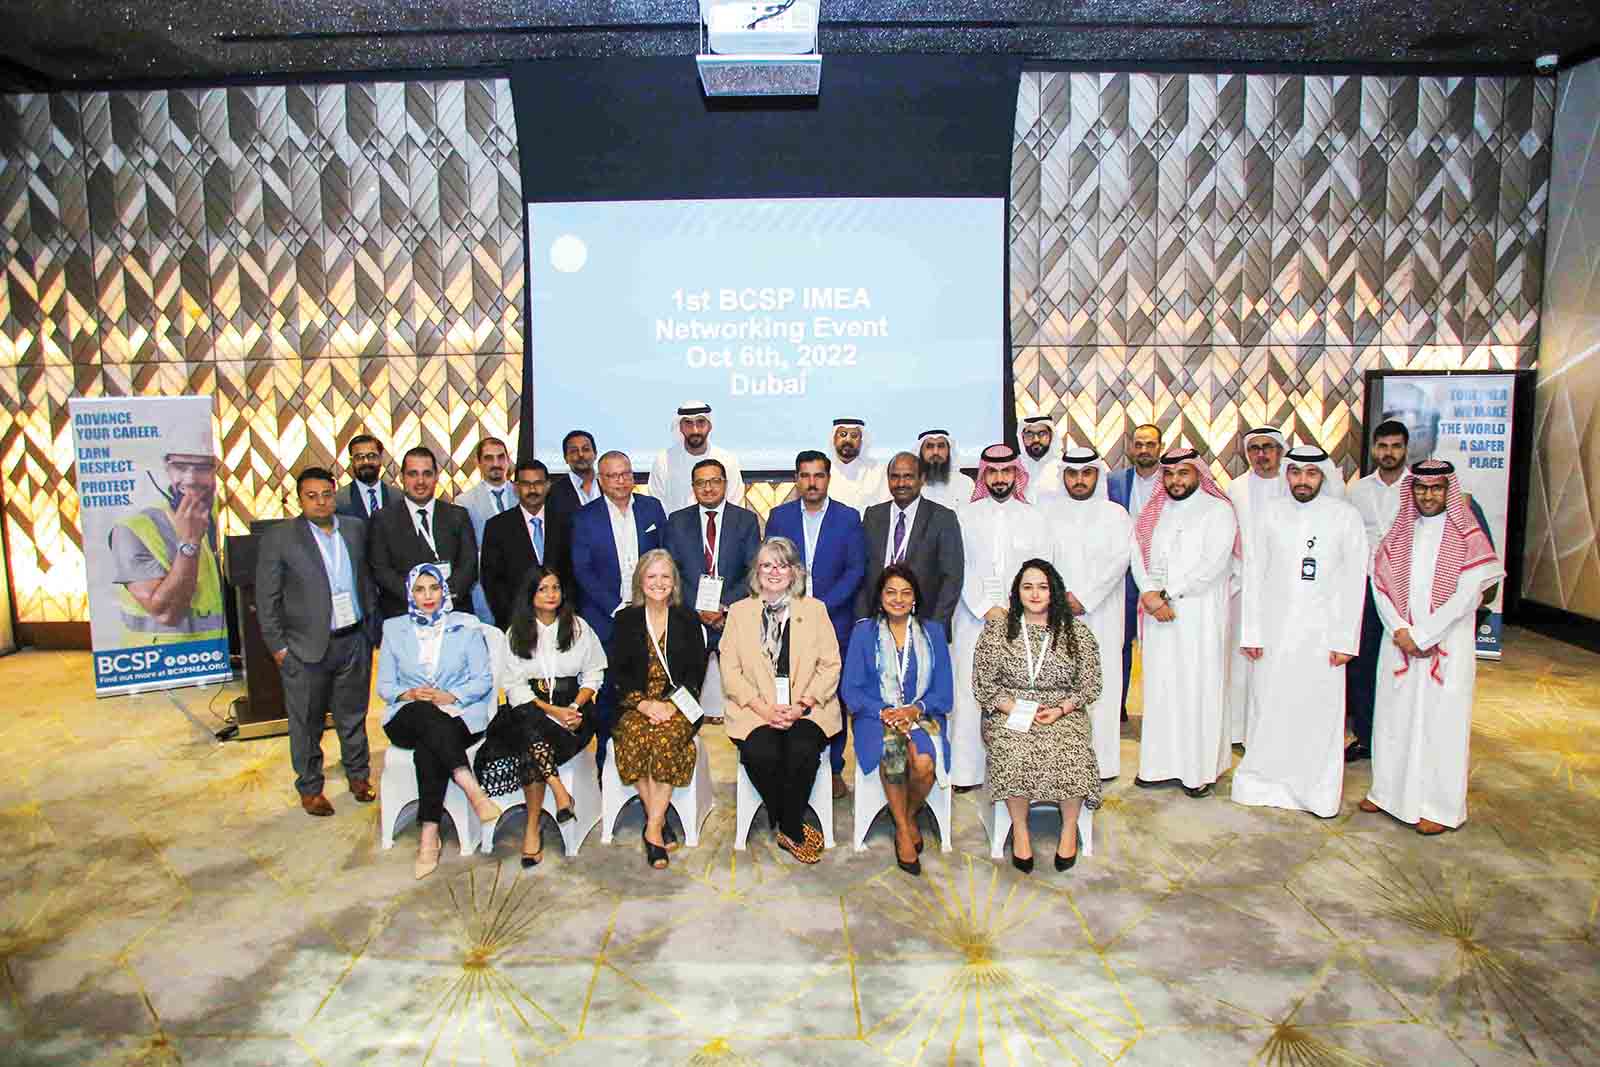 The Council of Certified Safety Professionals holds the first meeting in the Middle East in Dubai